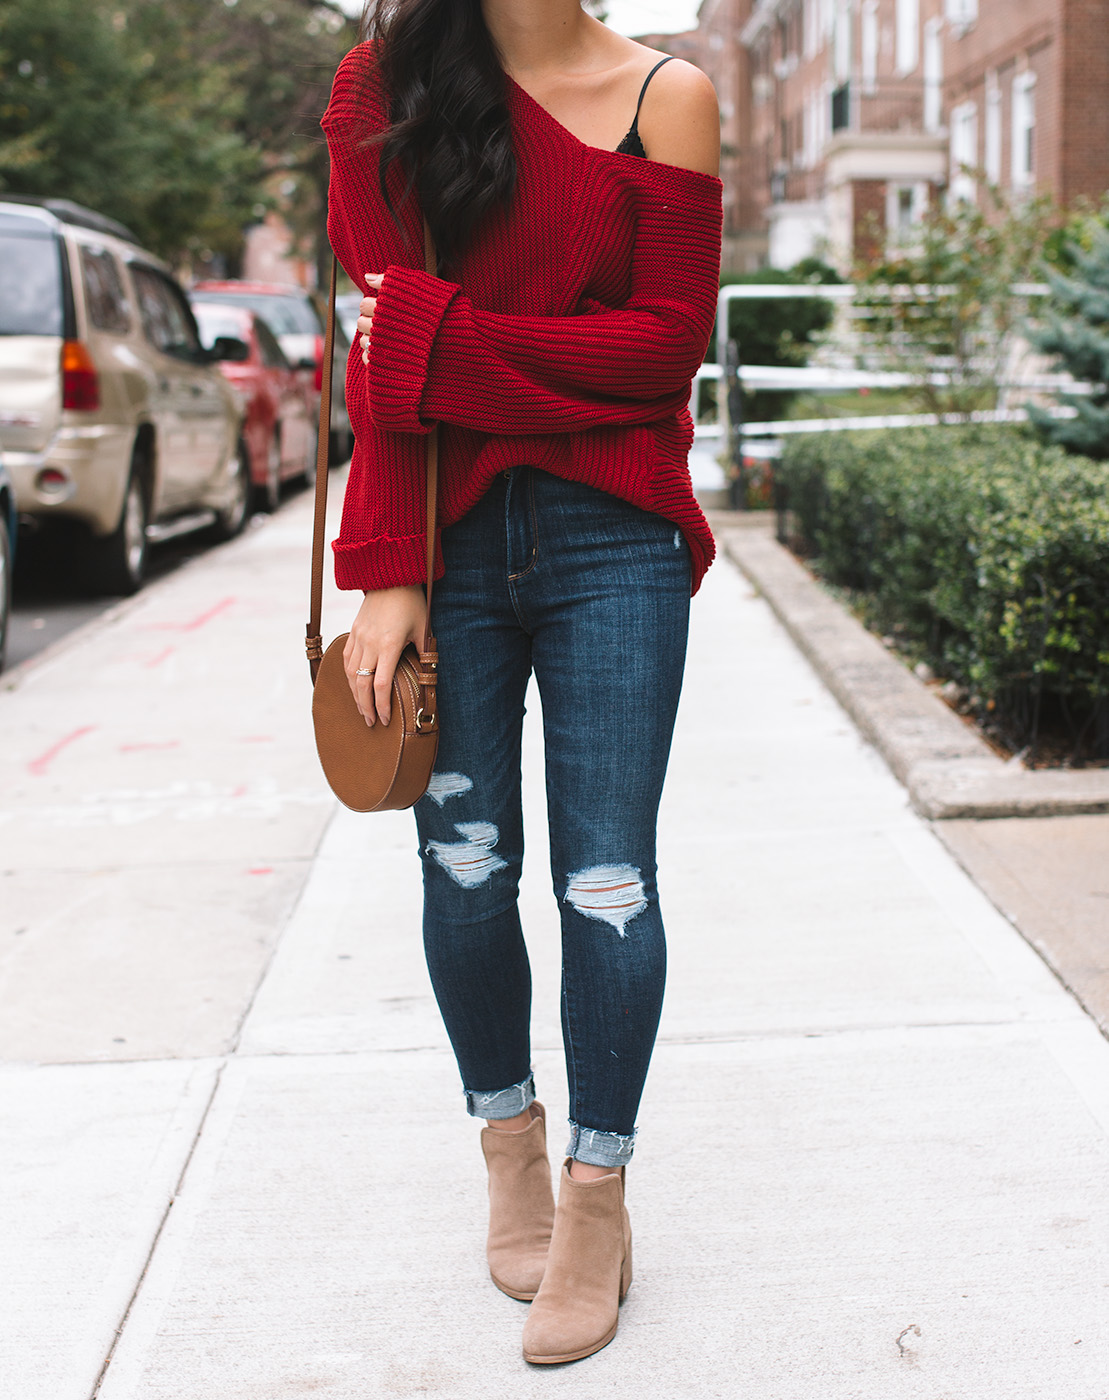 Trendy ripped denim jeans with cute red sweater and black leather belt.